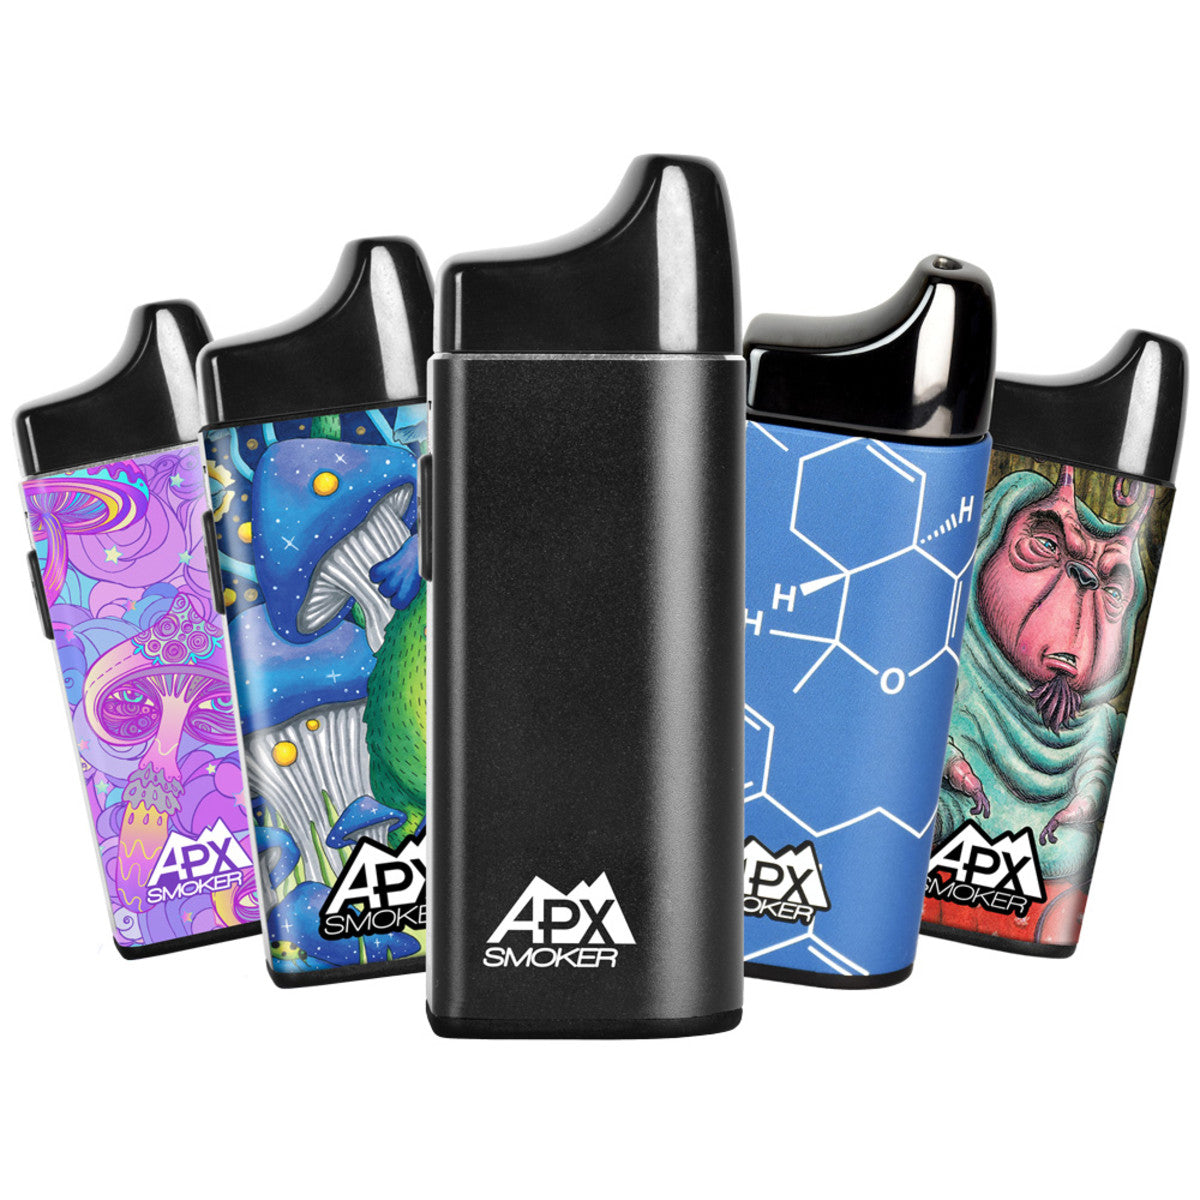 Pulsar APX Smoker V3 Electric Pipe colors designs